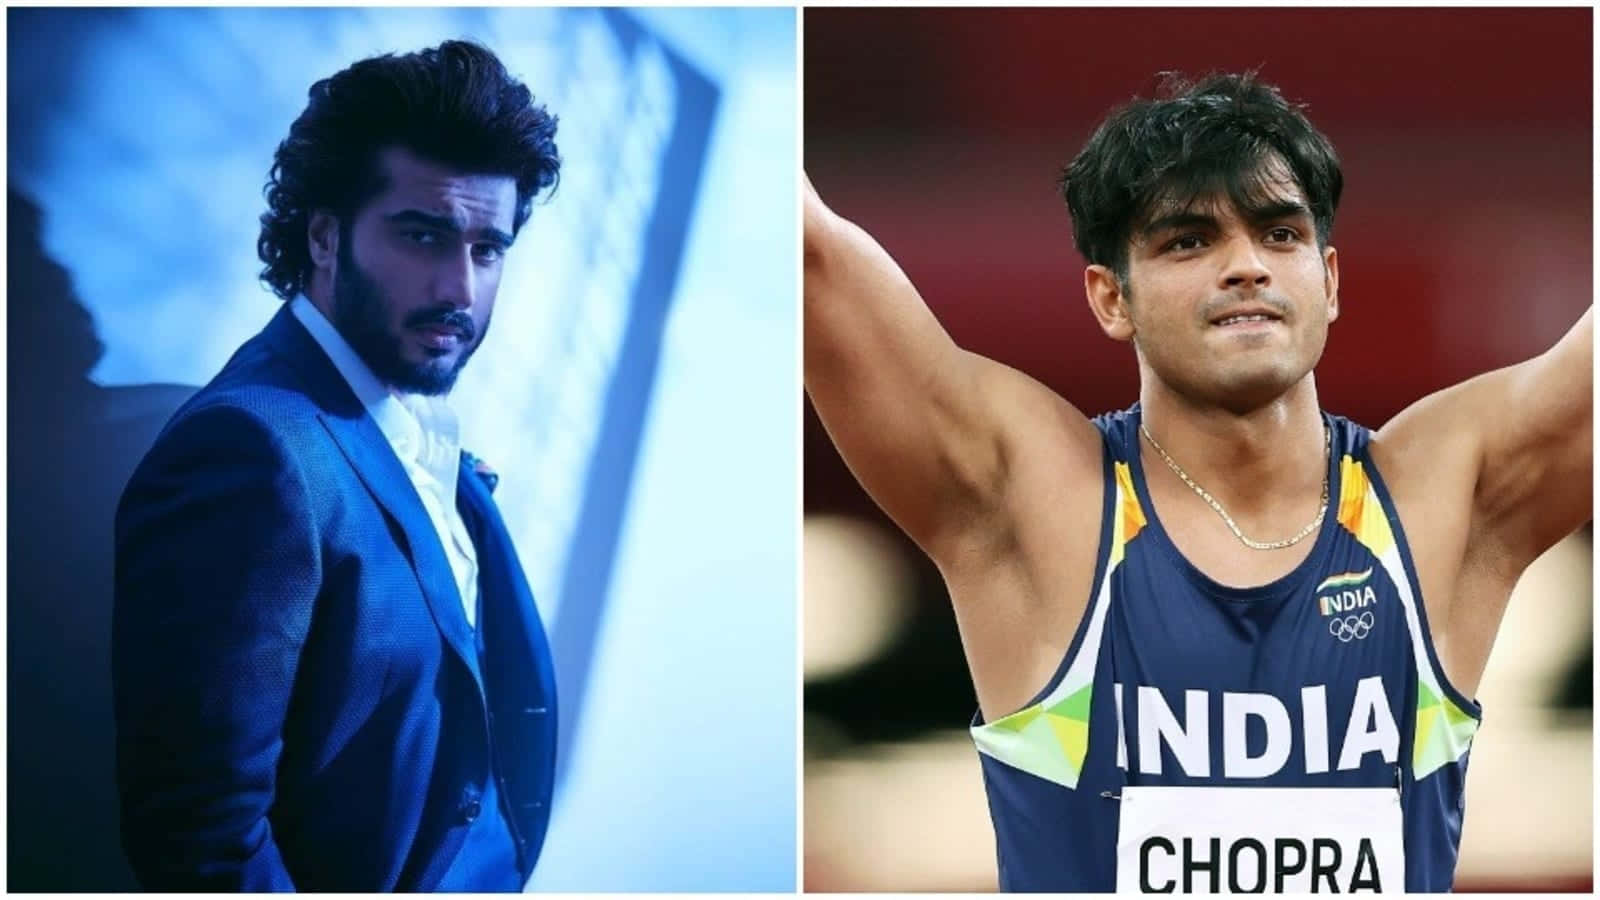 India’s athlete Neeraj Chopra winning the gold medal in javelin at the Asian Games 2018